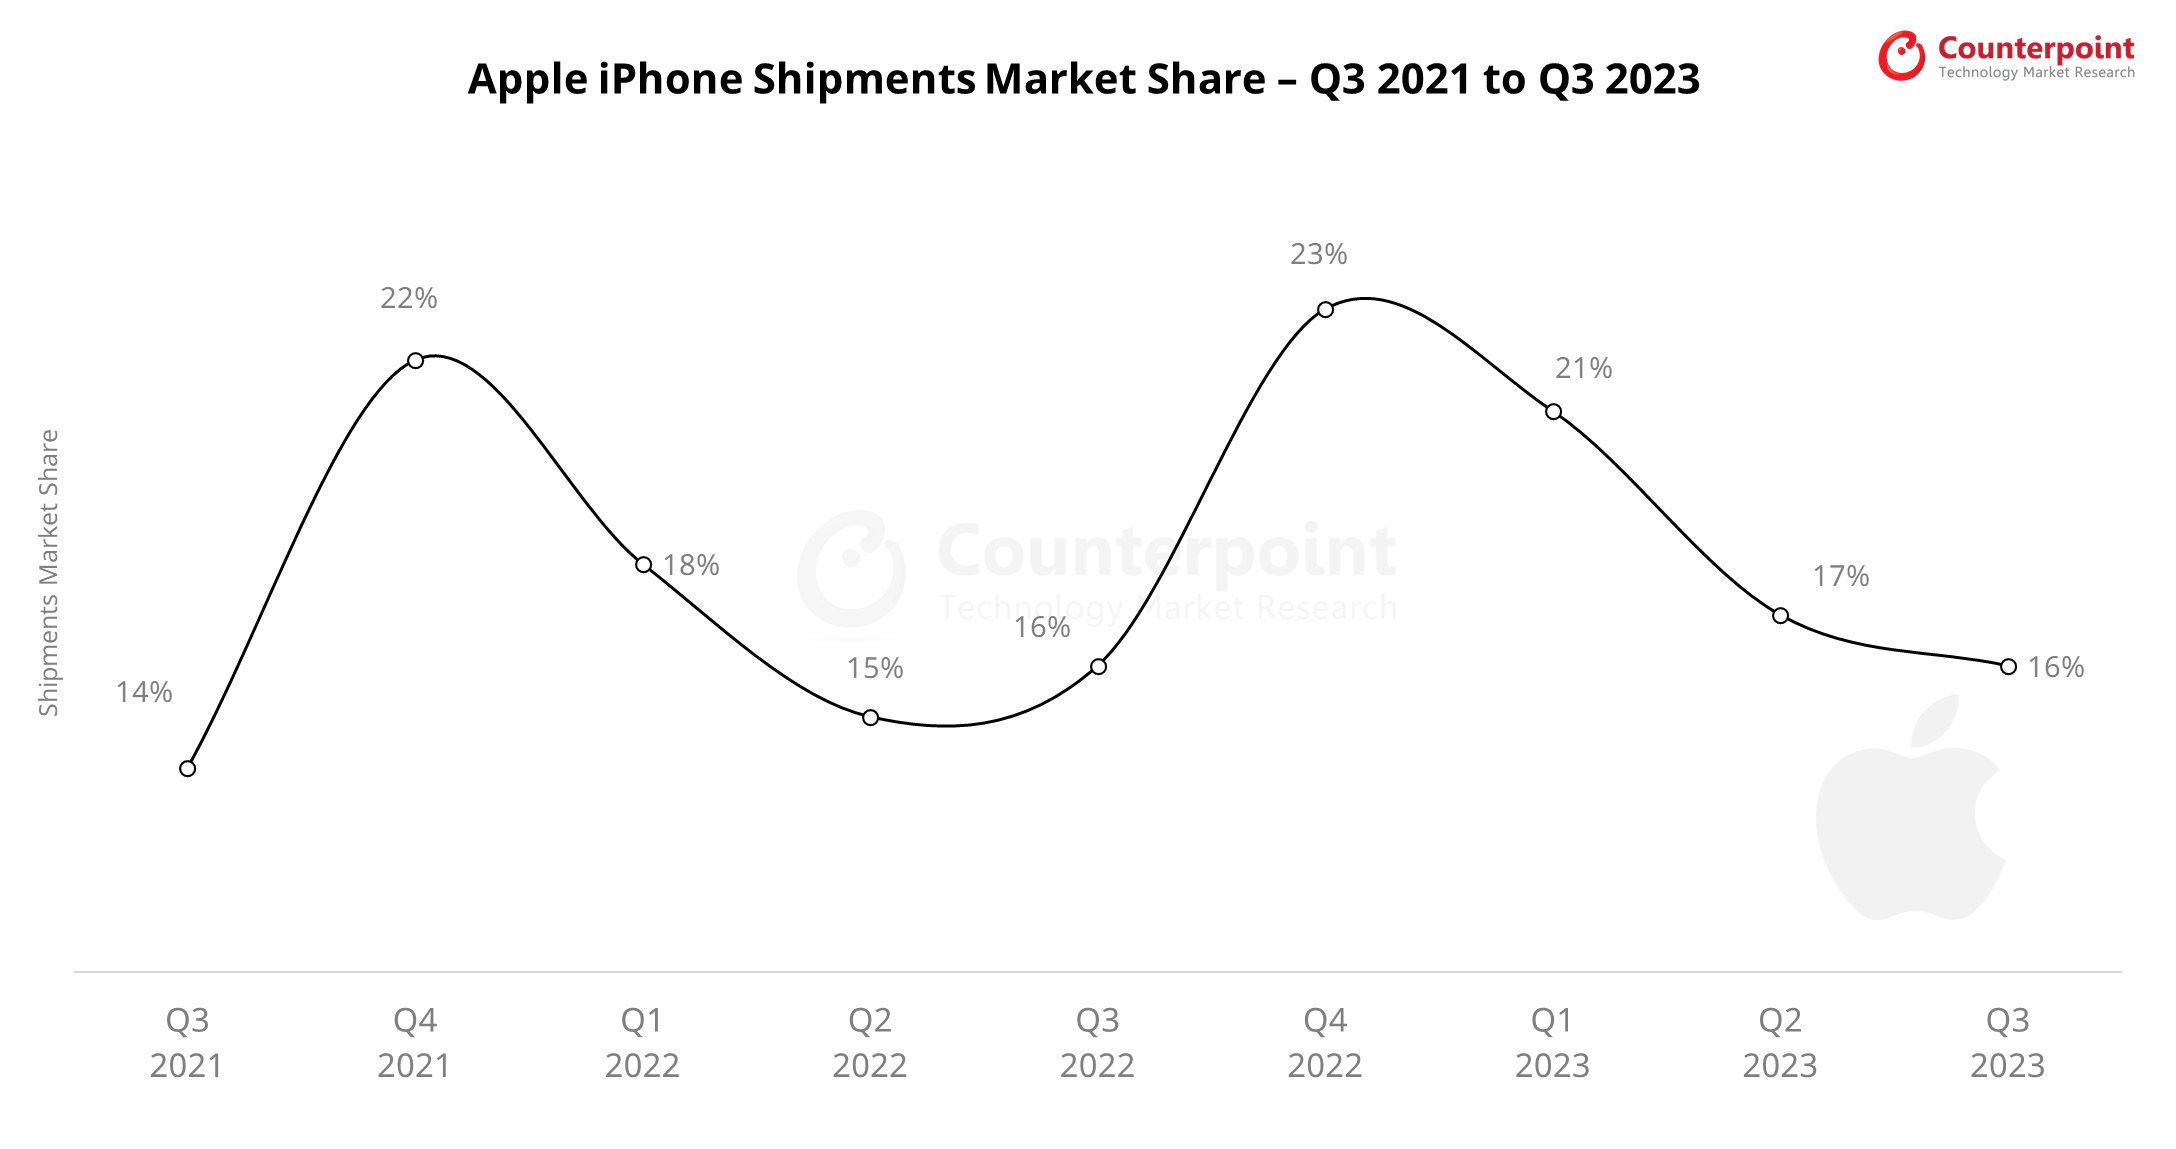 Counterpoint Apple iPhone Shipments Market Share Q3 2023